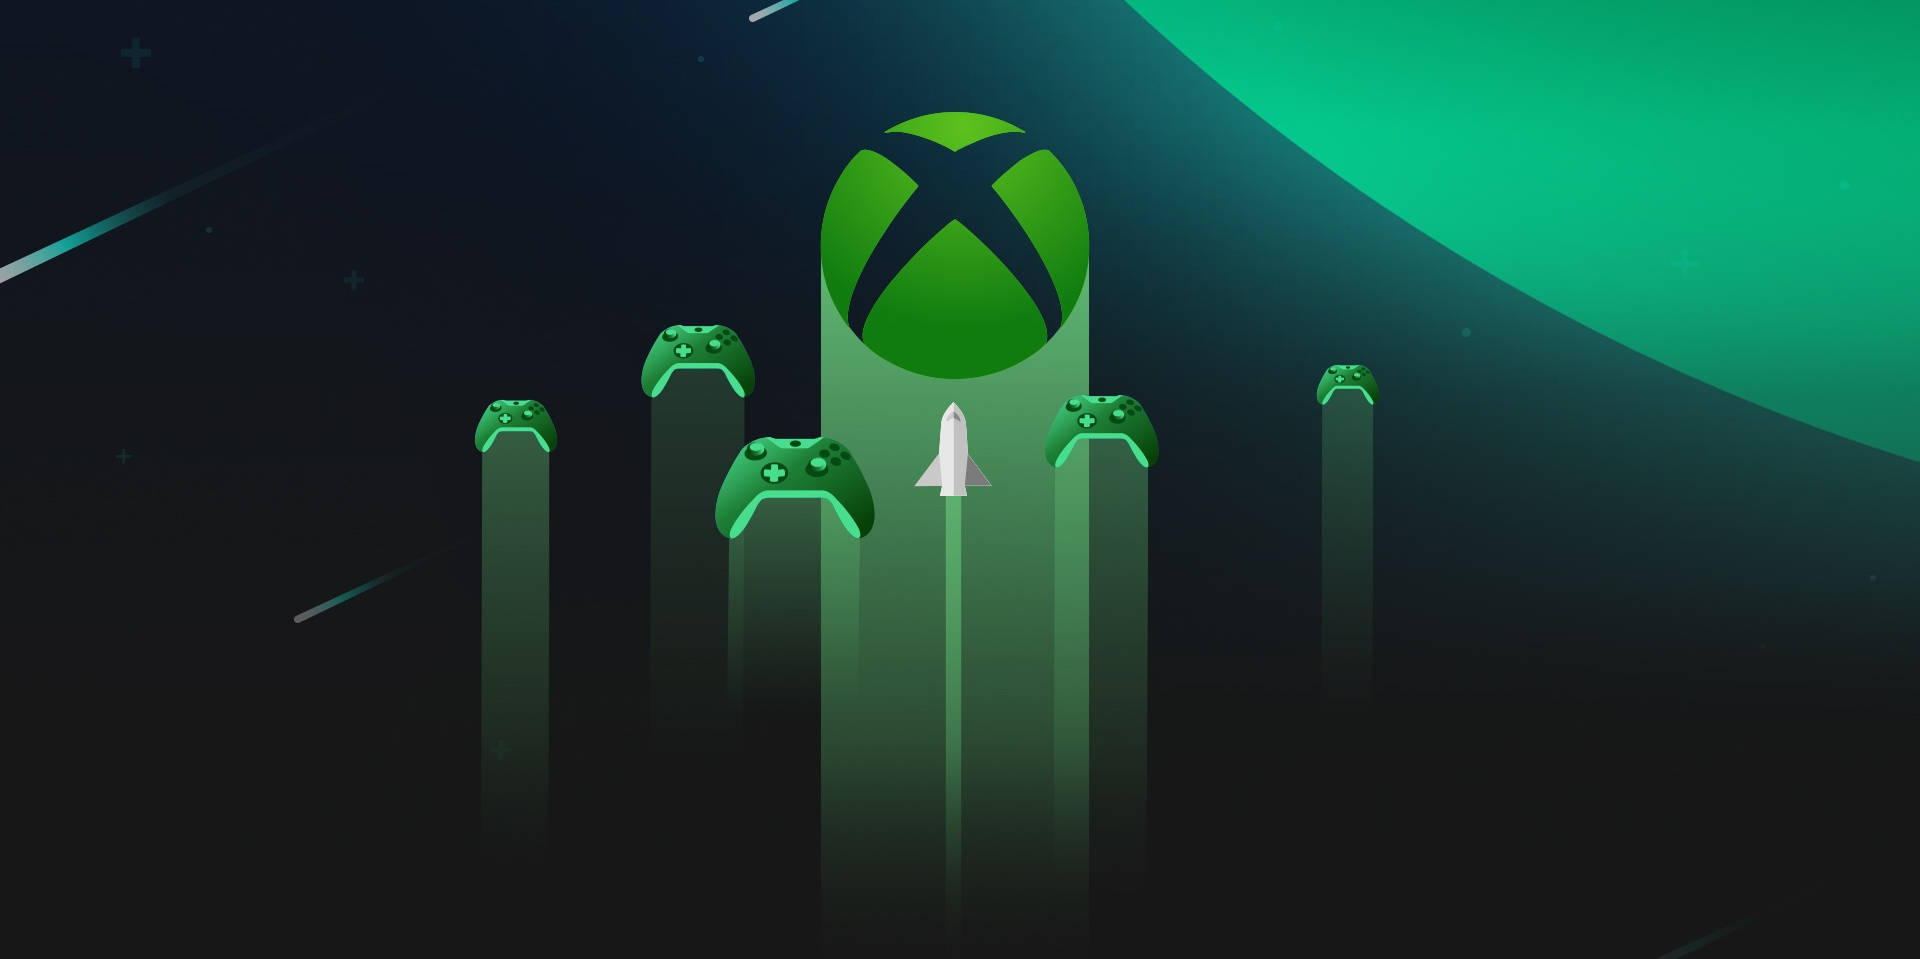 Xbox Series X Pictures Wallpaper